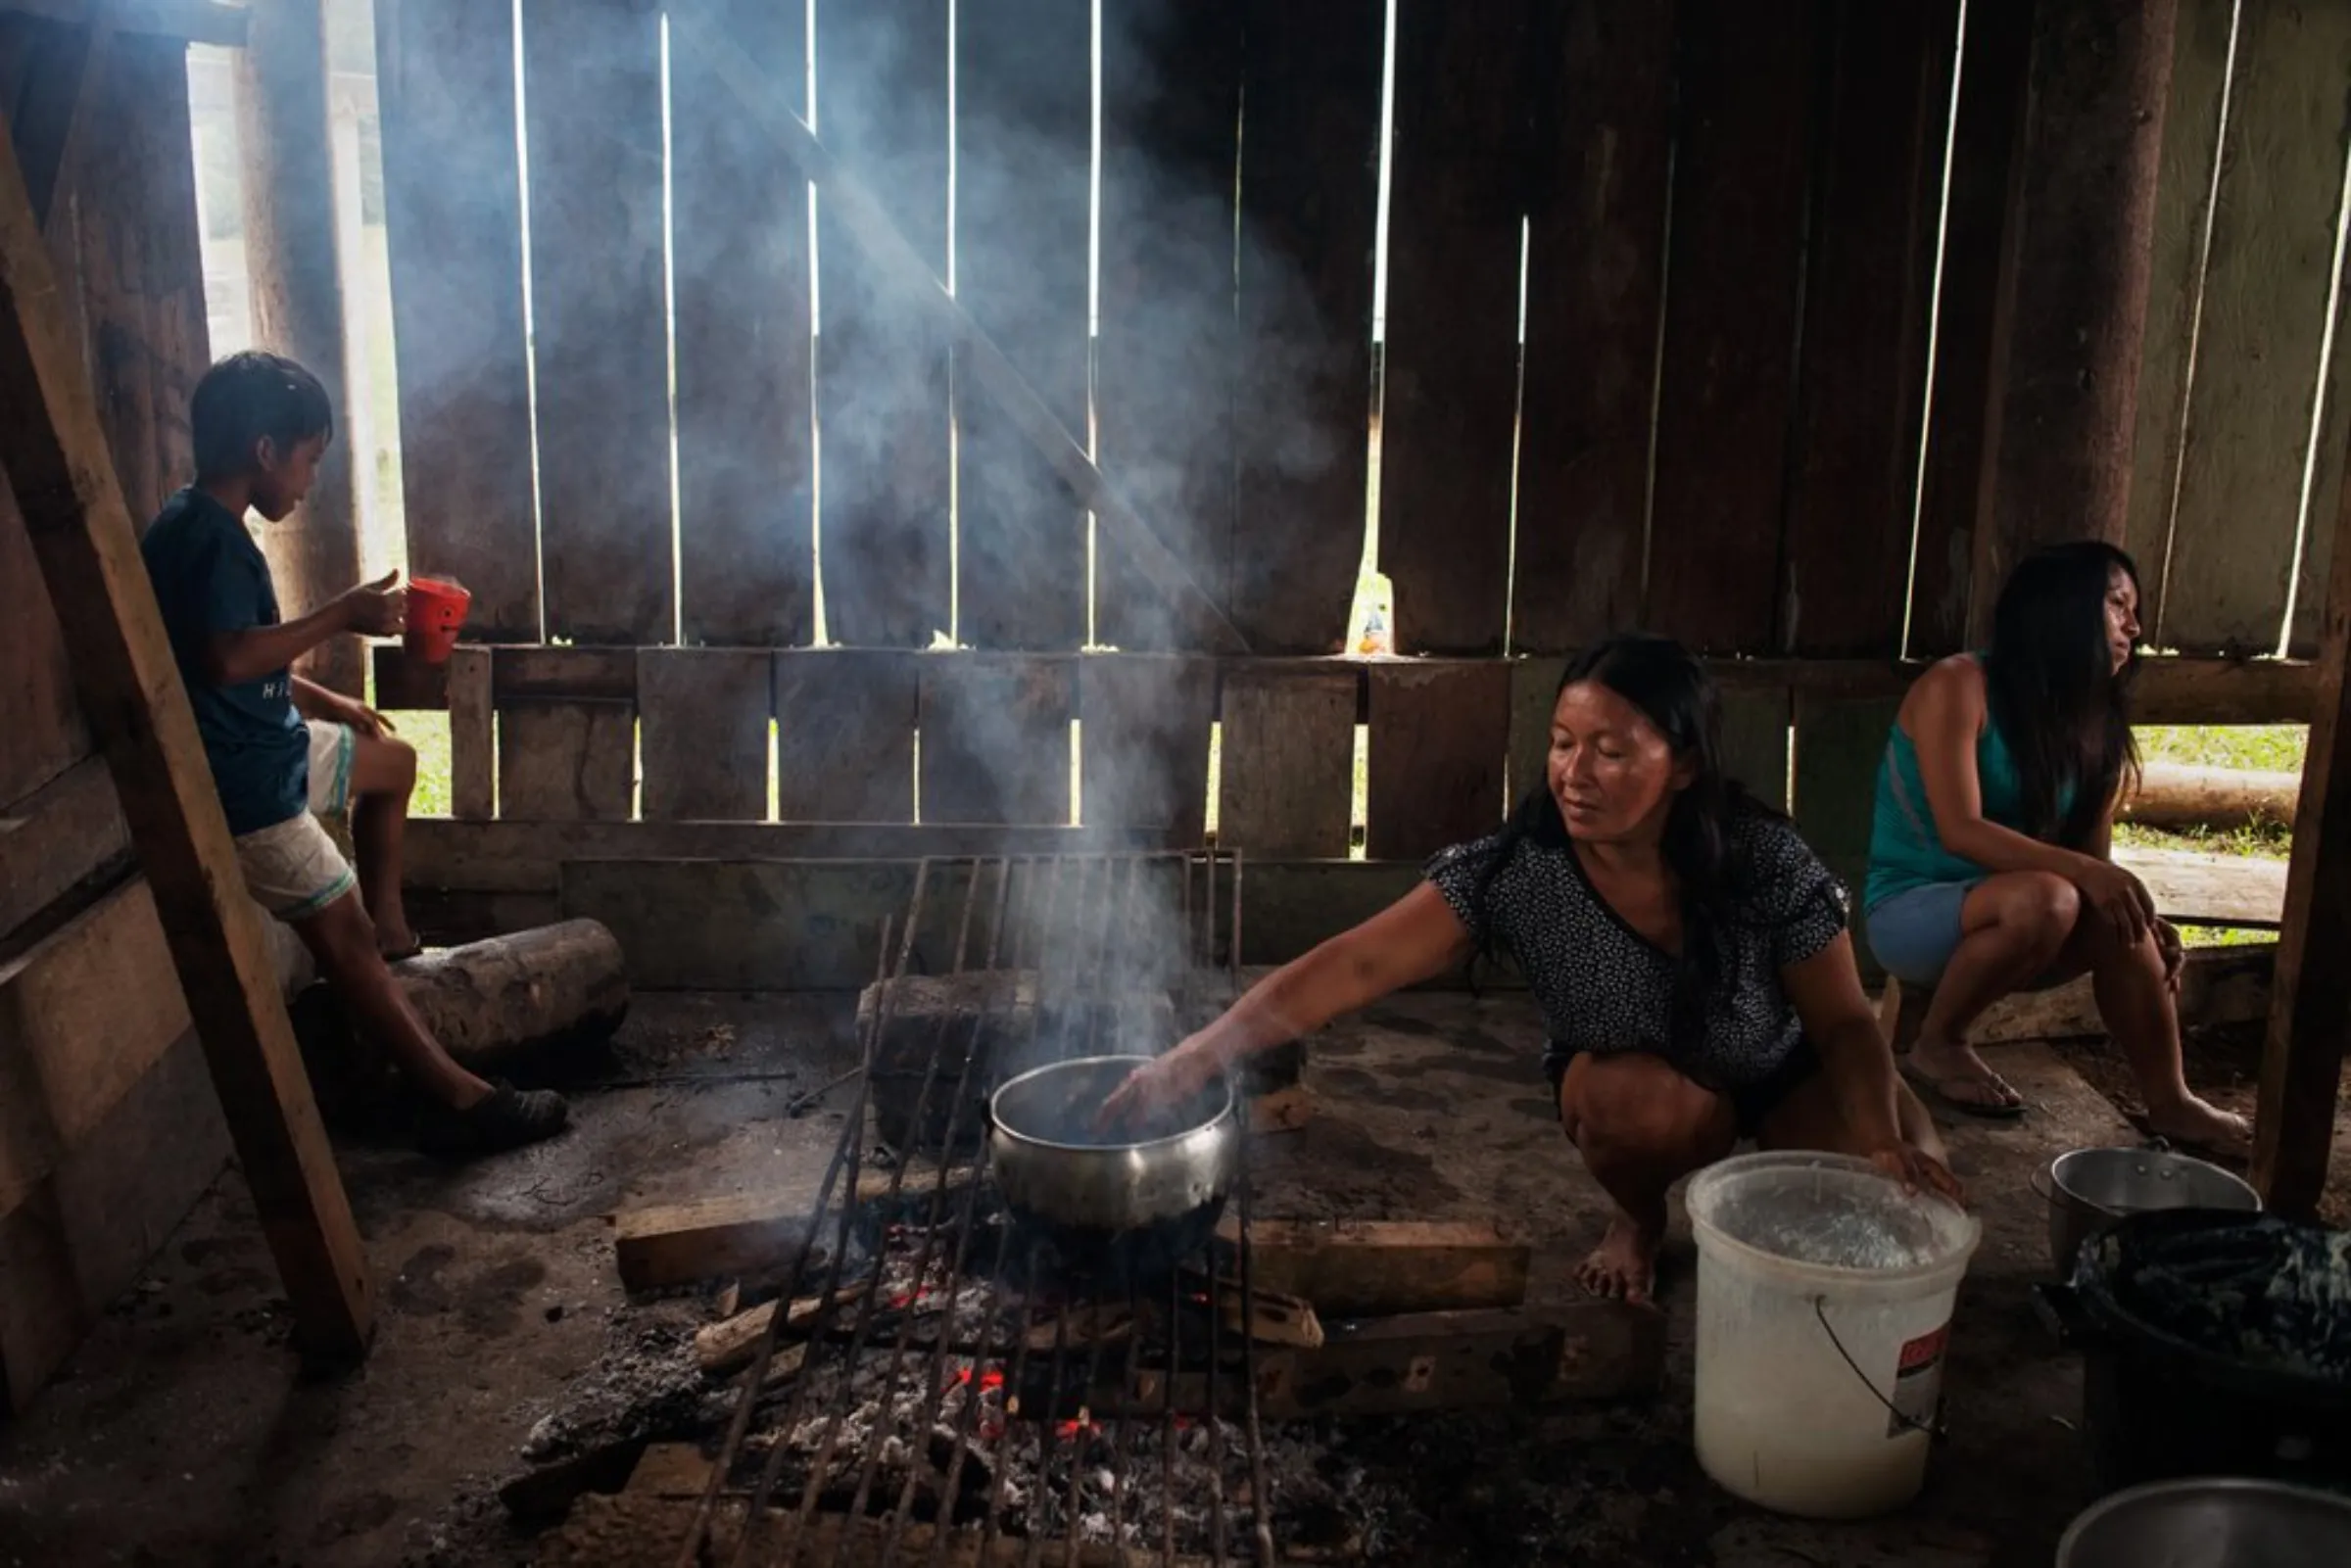 Women from the Waorani indigenous group prepare a fish stew at a rainforest village in the province of Pastaza, Ecuador, on April 26, 2022